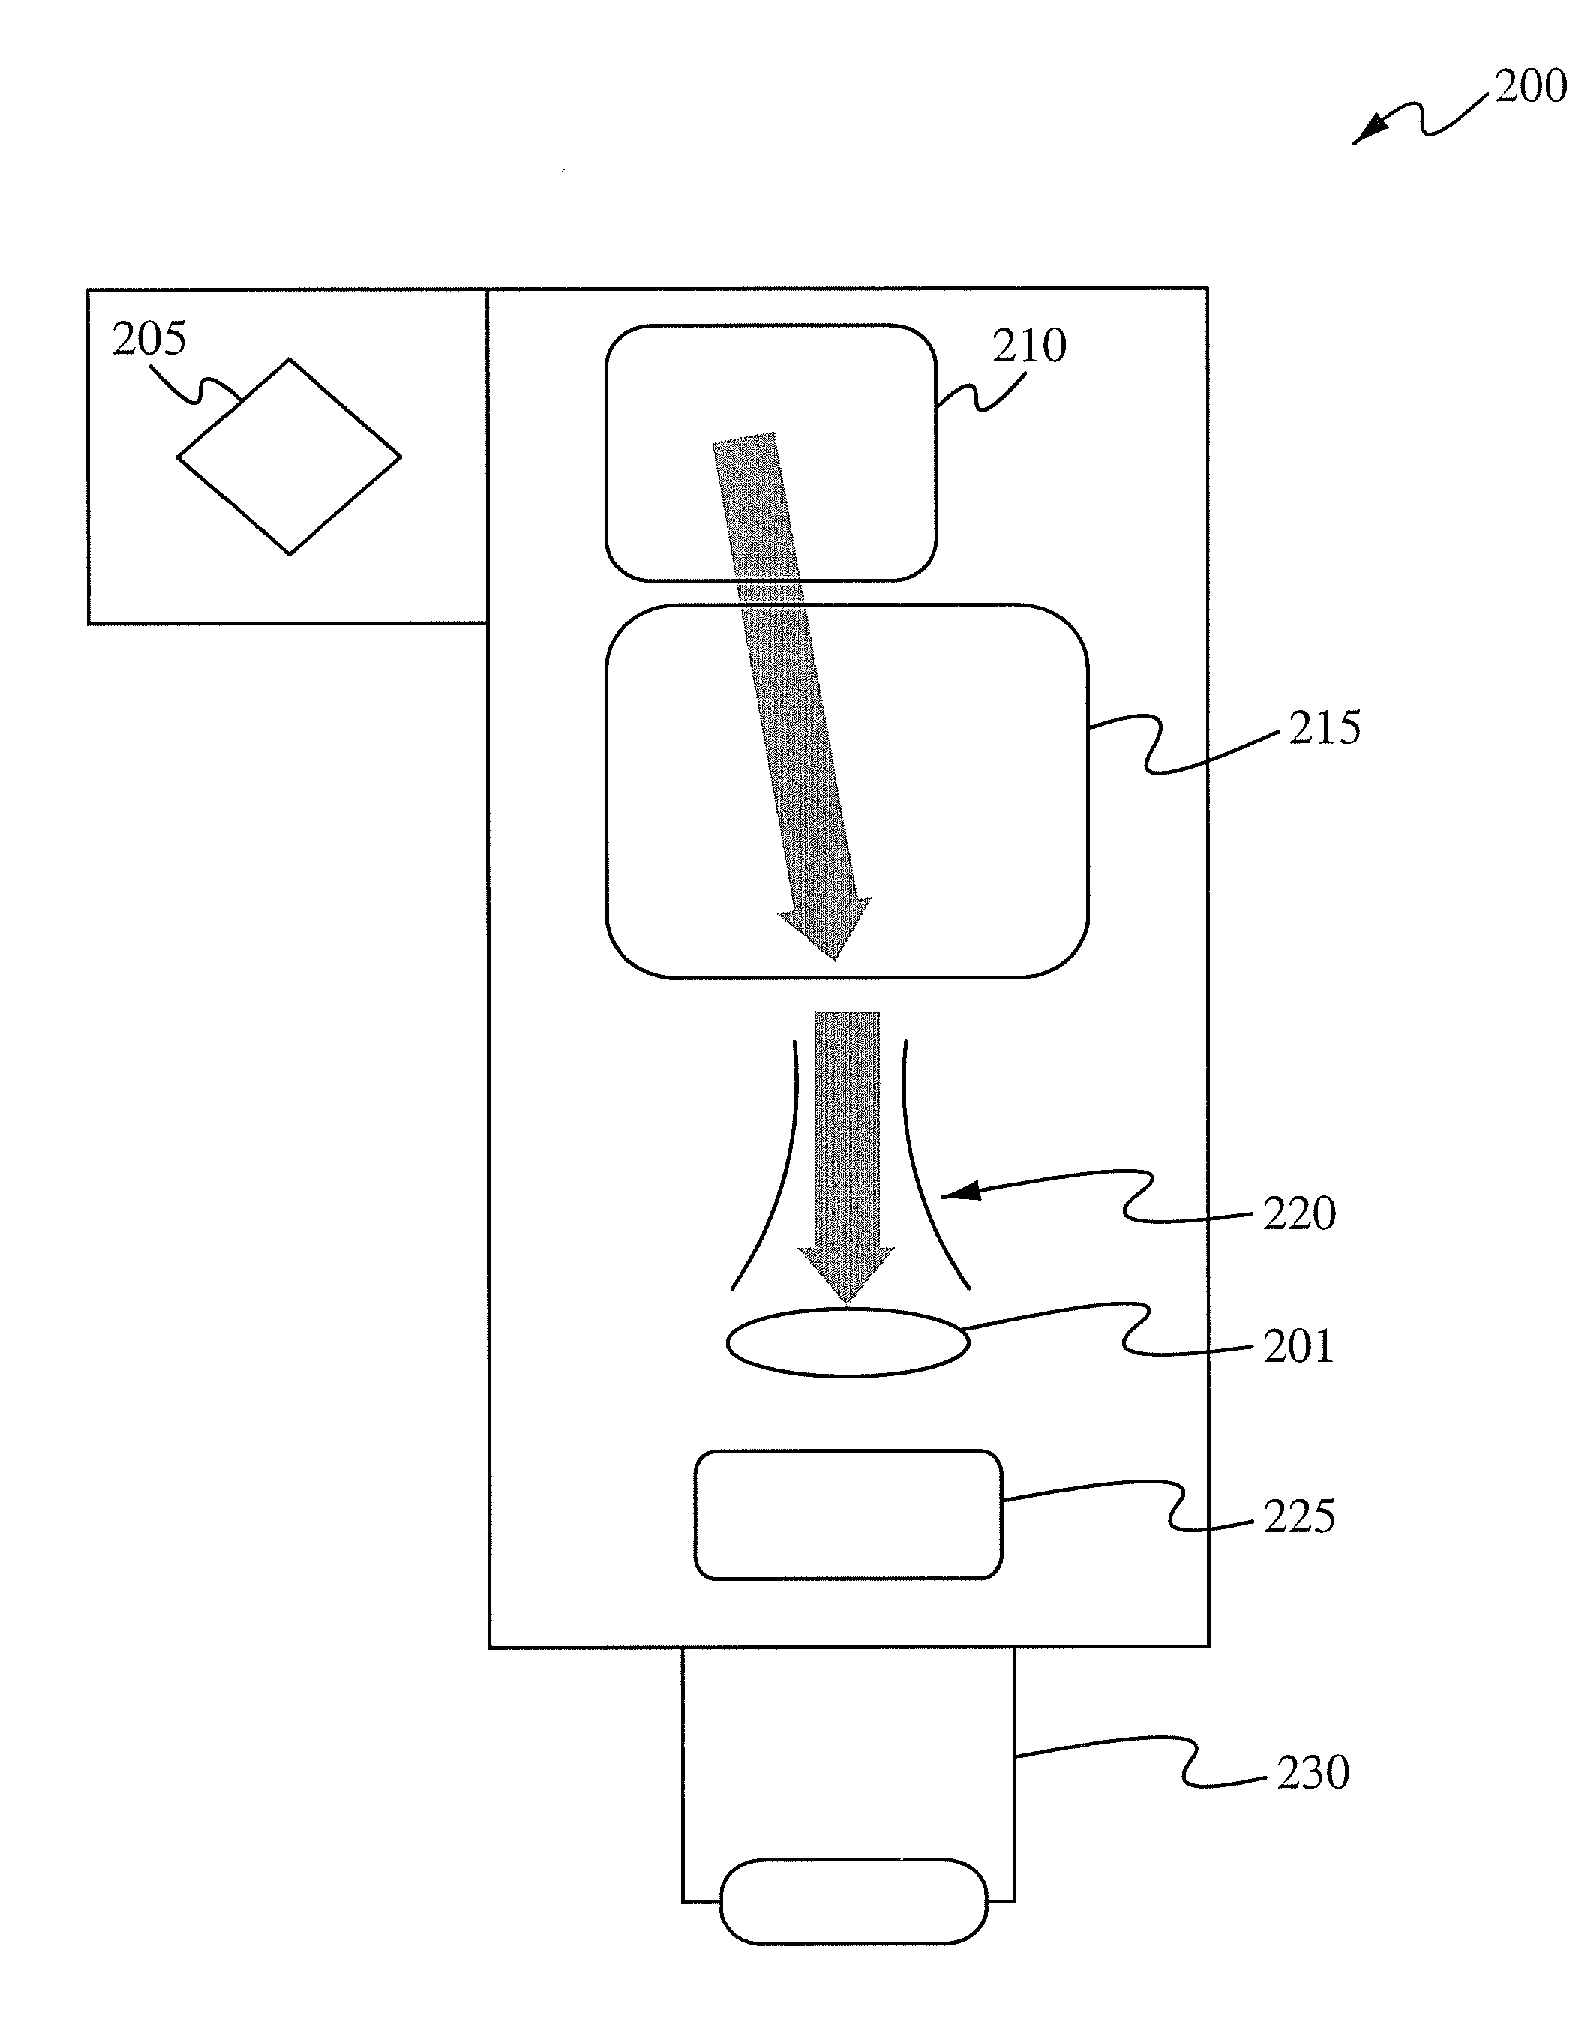 Application specific implant system and method for use in solar cell fabrications